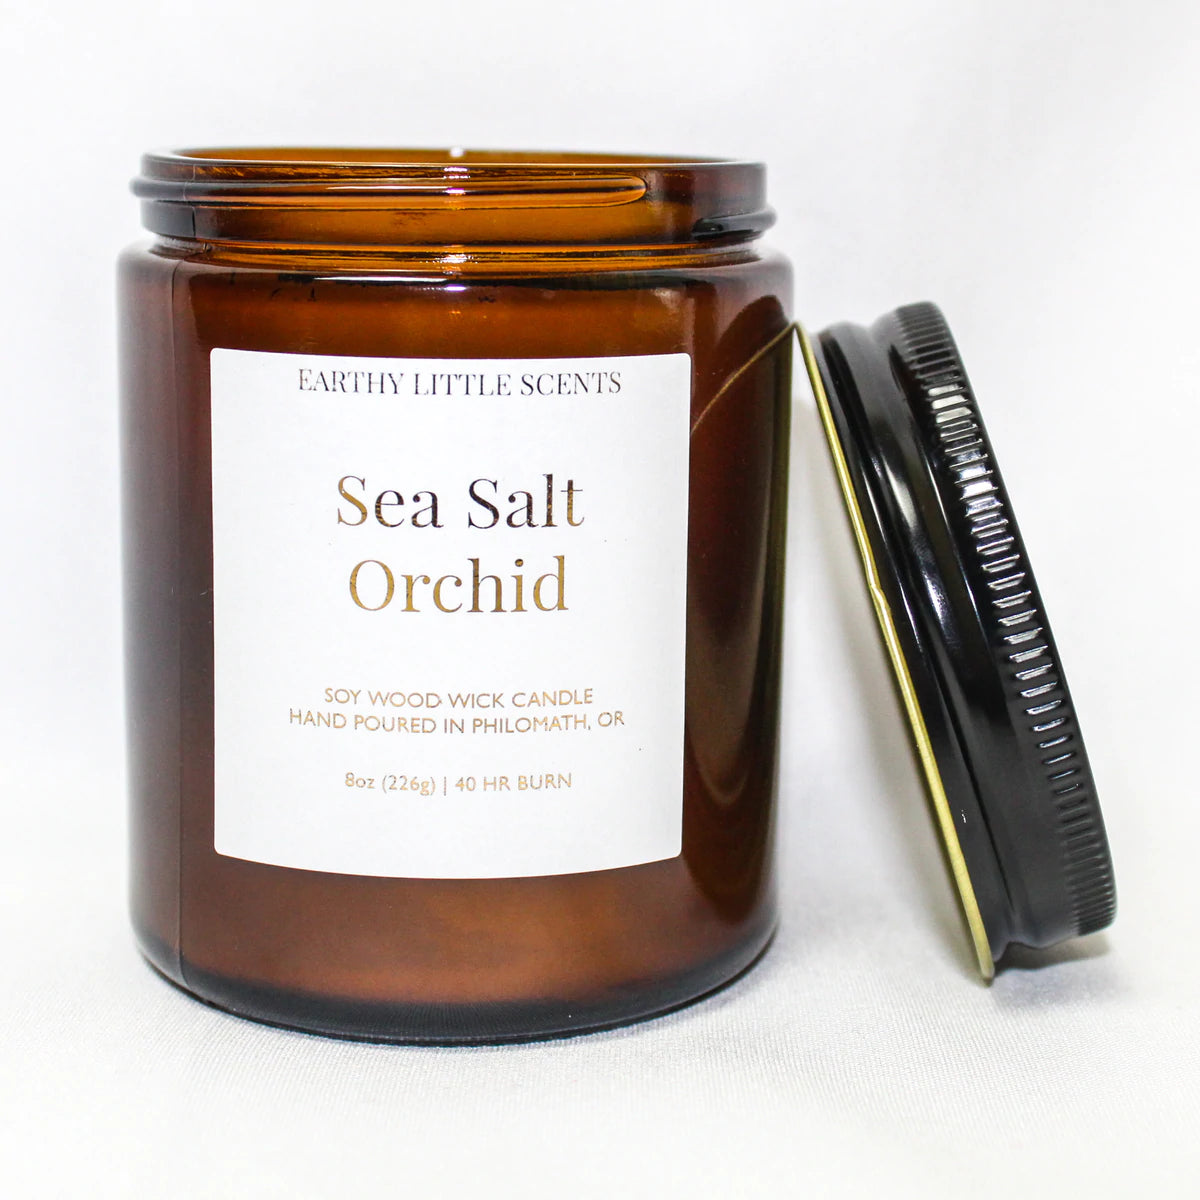 Sea Salt Orchid Soy Wood Wick Candle